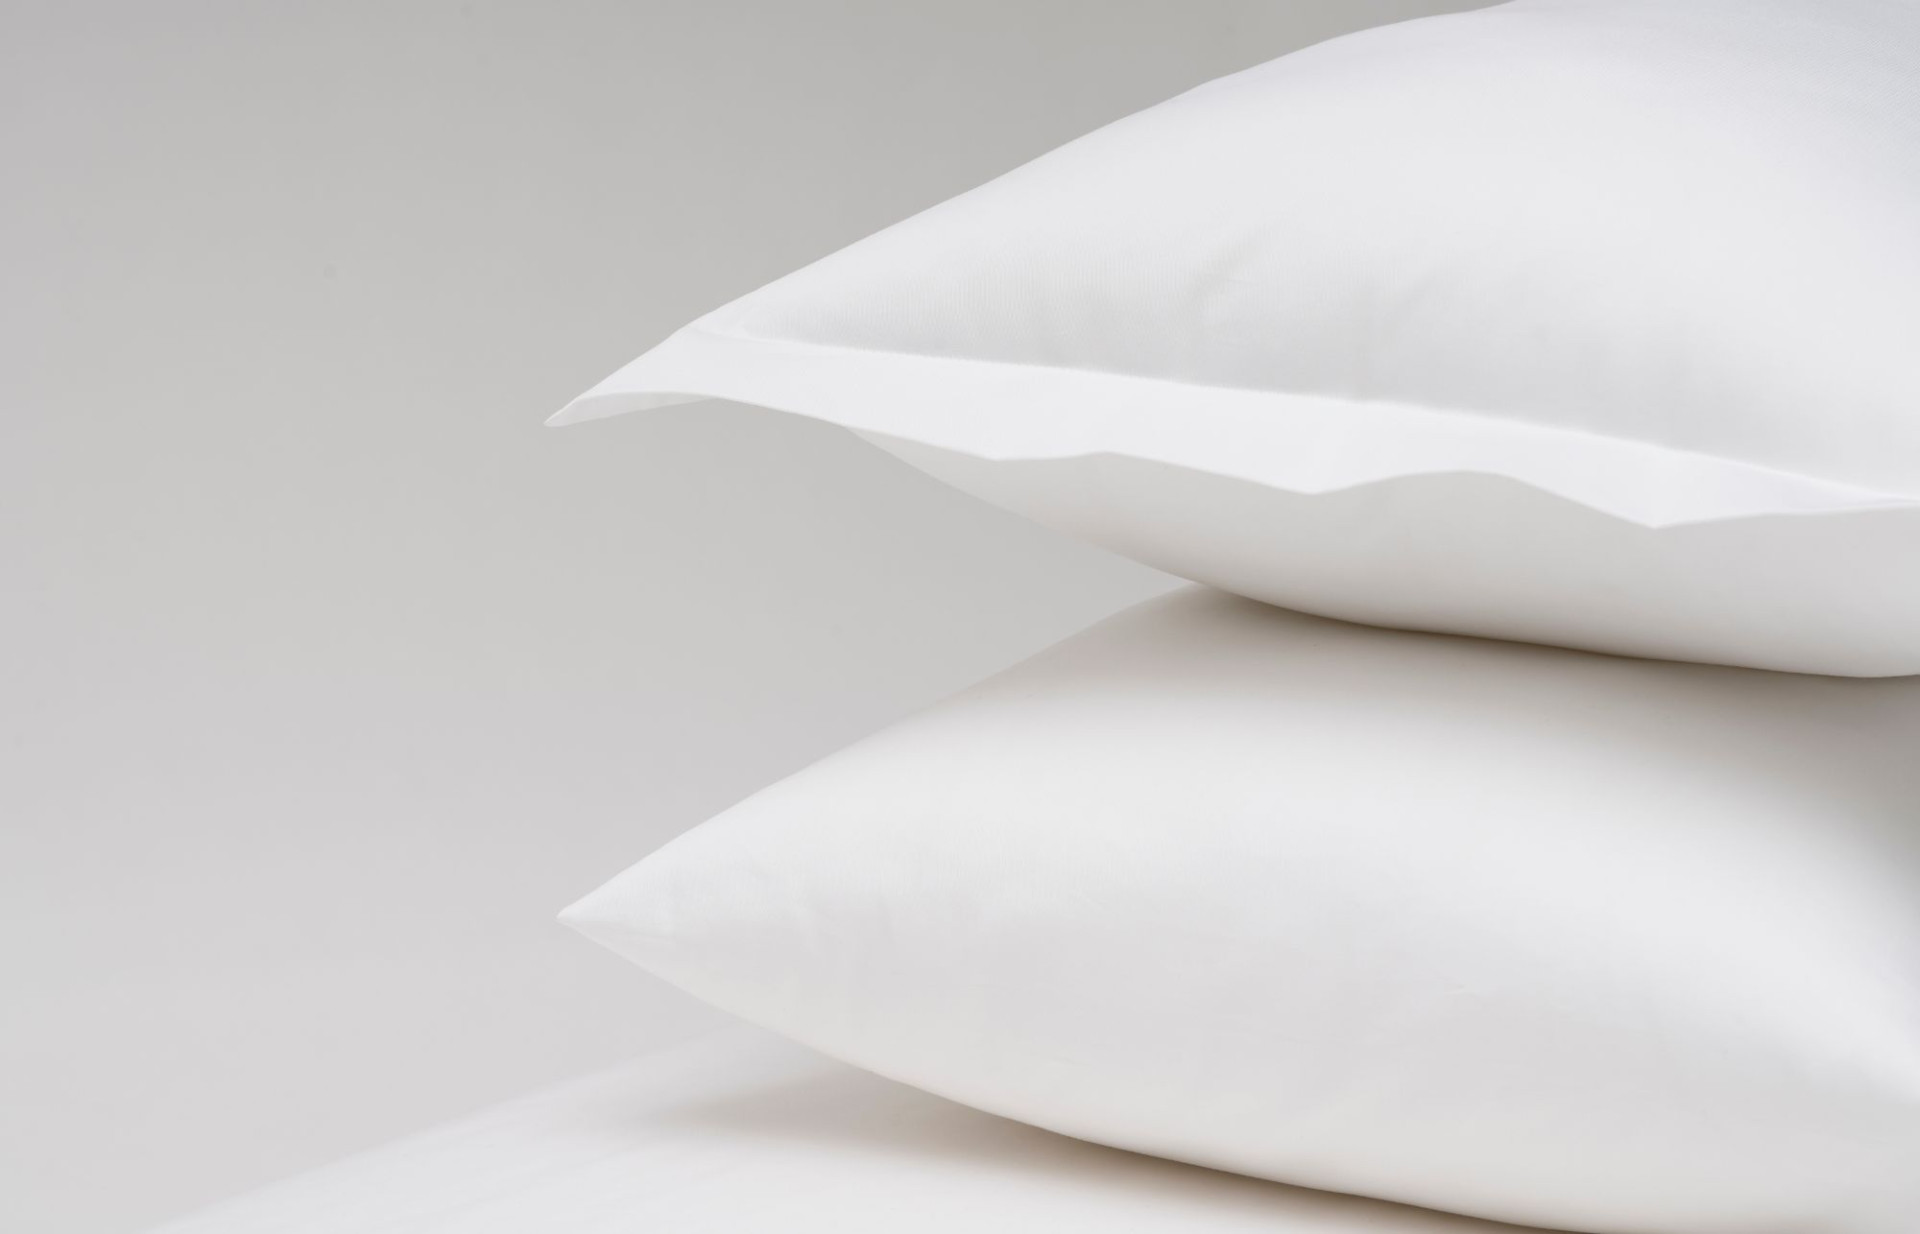 Organic Cloud Bed Linen in a refreshing white shade.